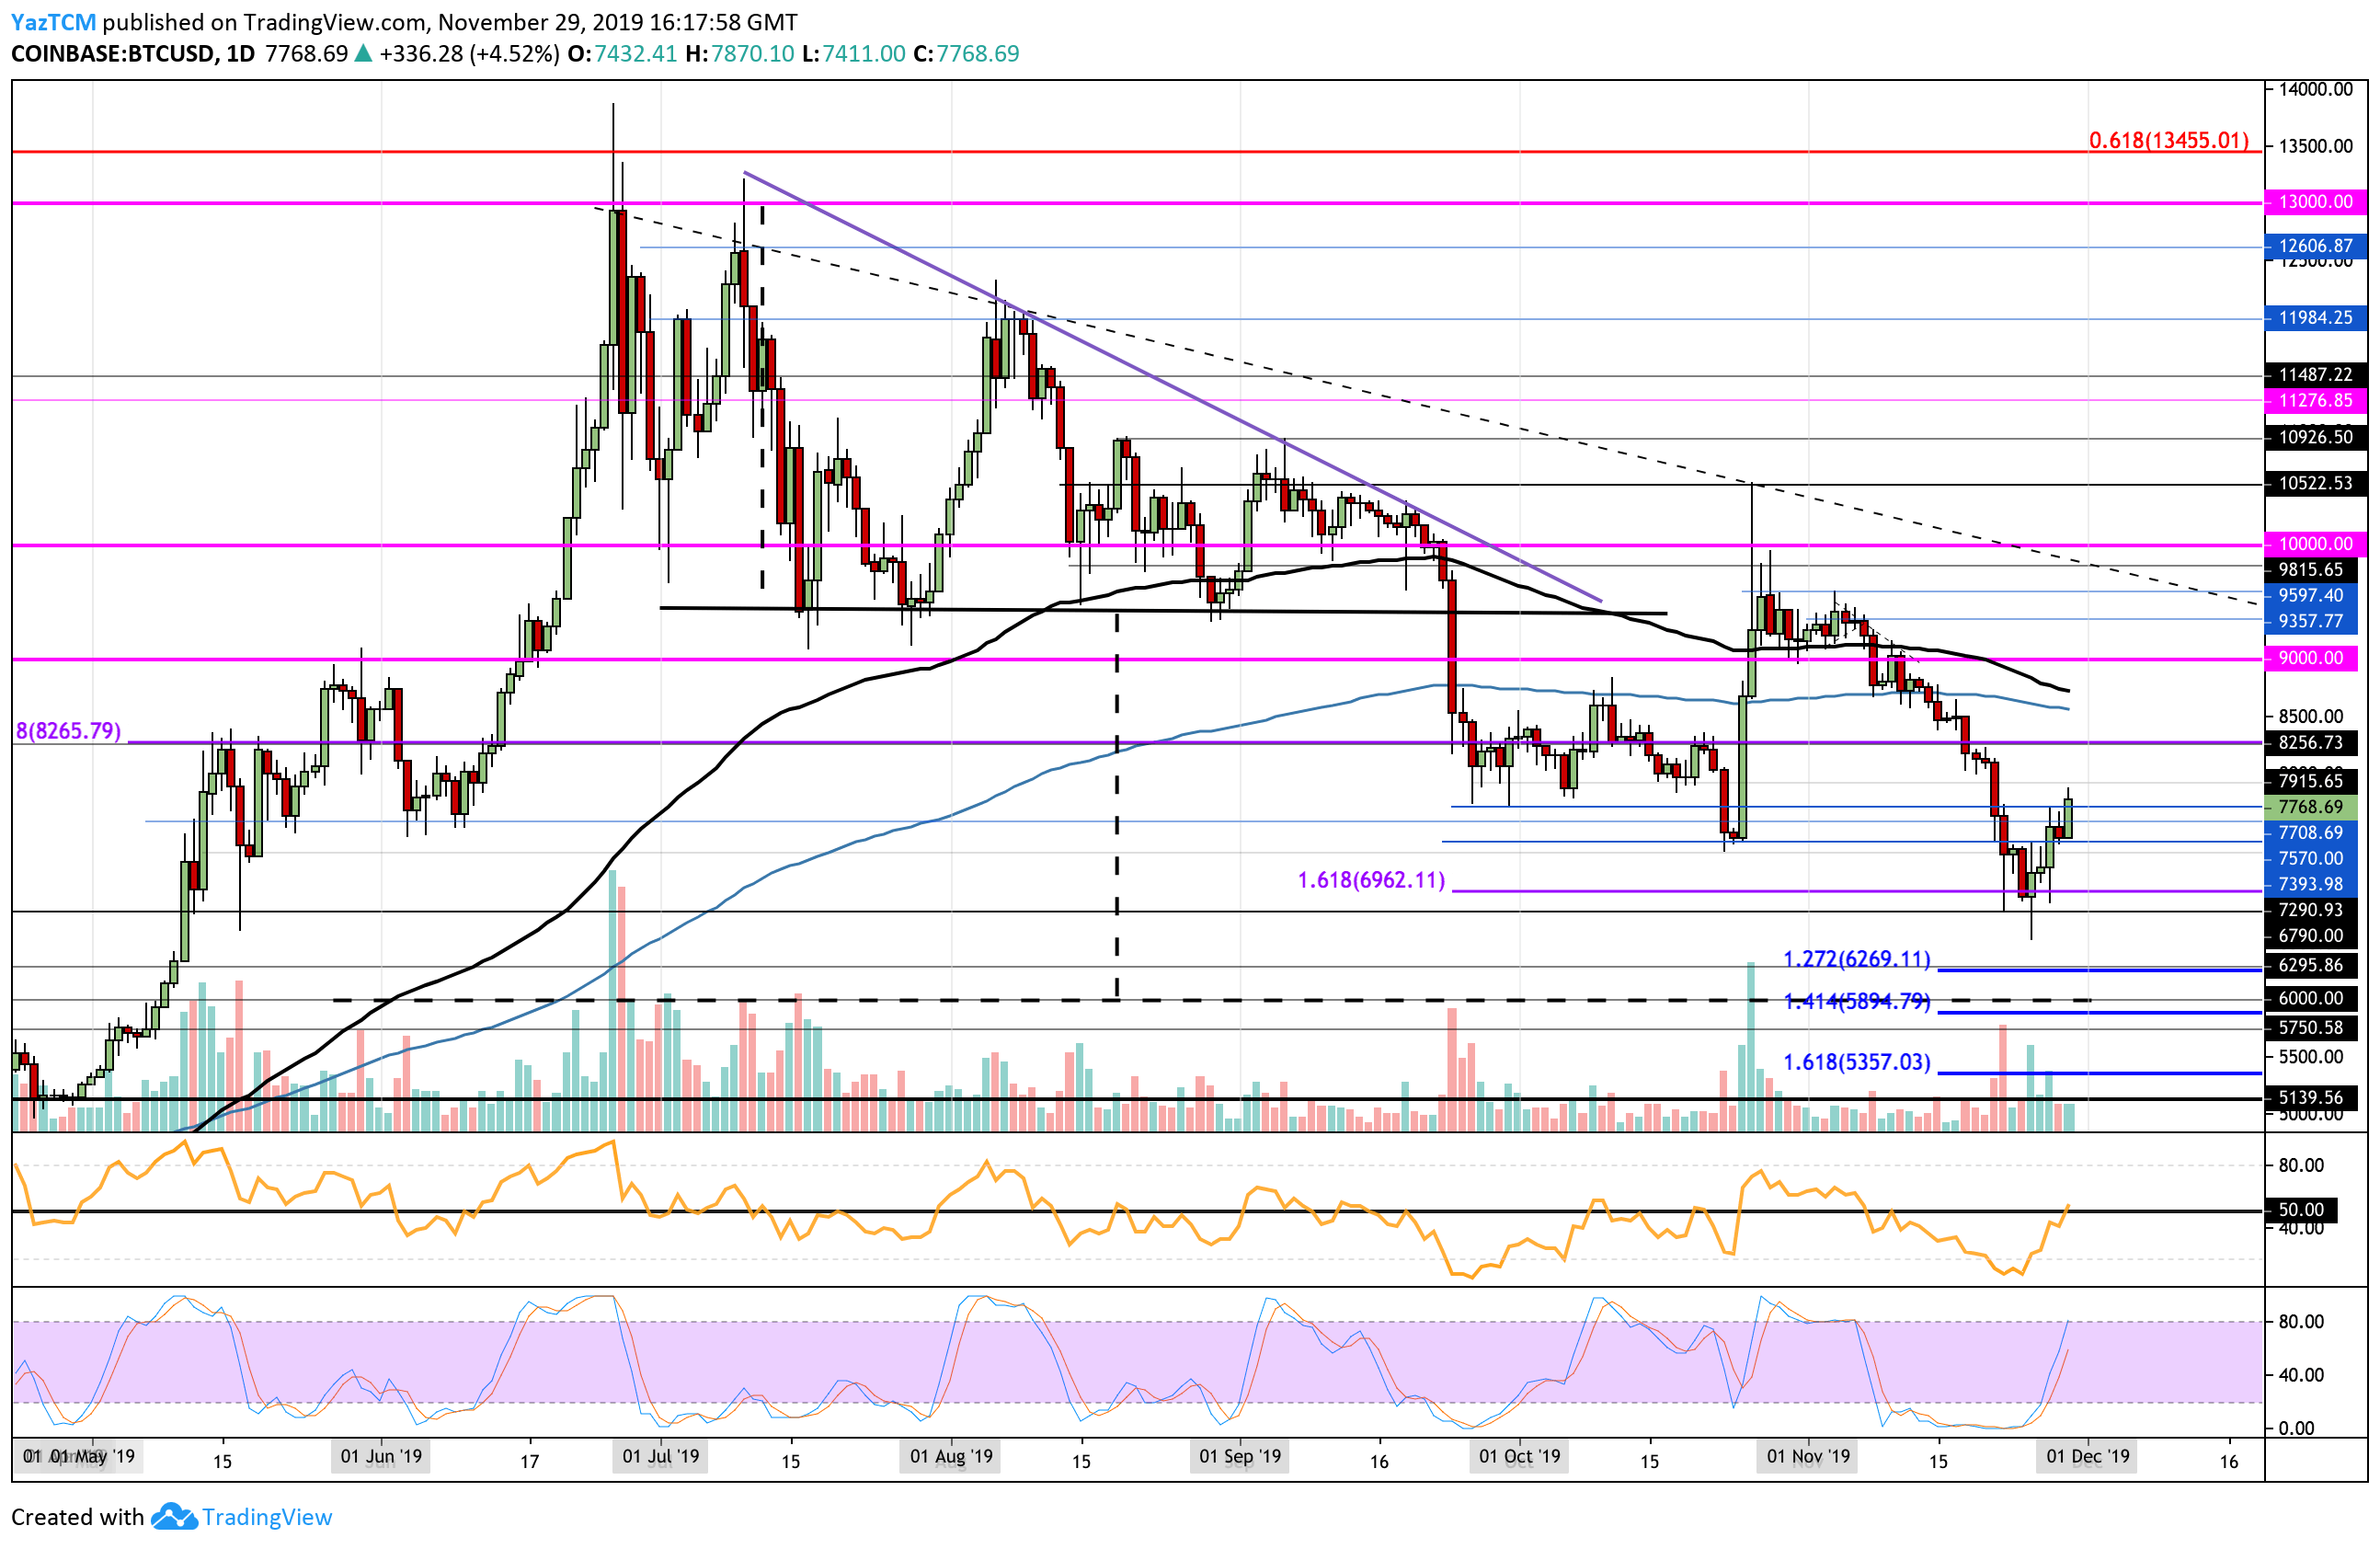 Crypto Price Analysis & Overview November 29: Bitcoin, Ethereum, Ripple, Tron, and Matic